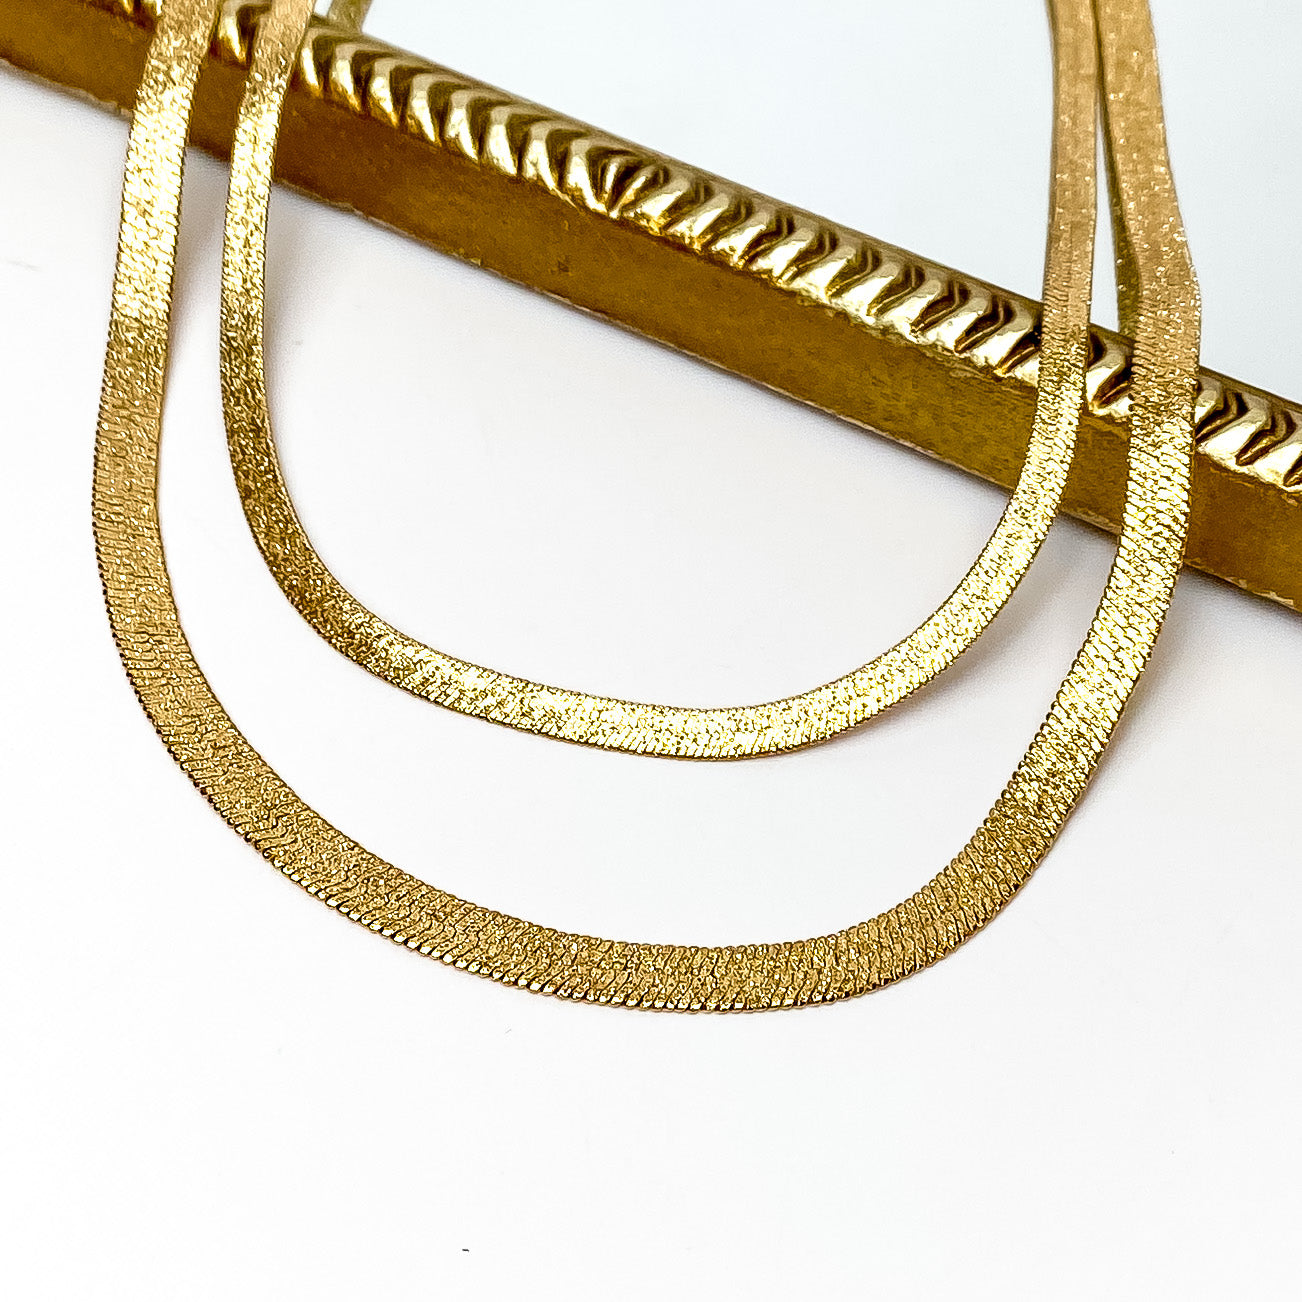 Double layered gold herringbone chain necklace. This necklace is pictured partially laying on a gold mirror on a white background. 